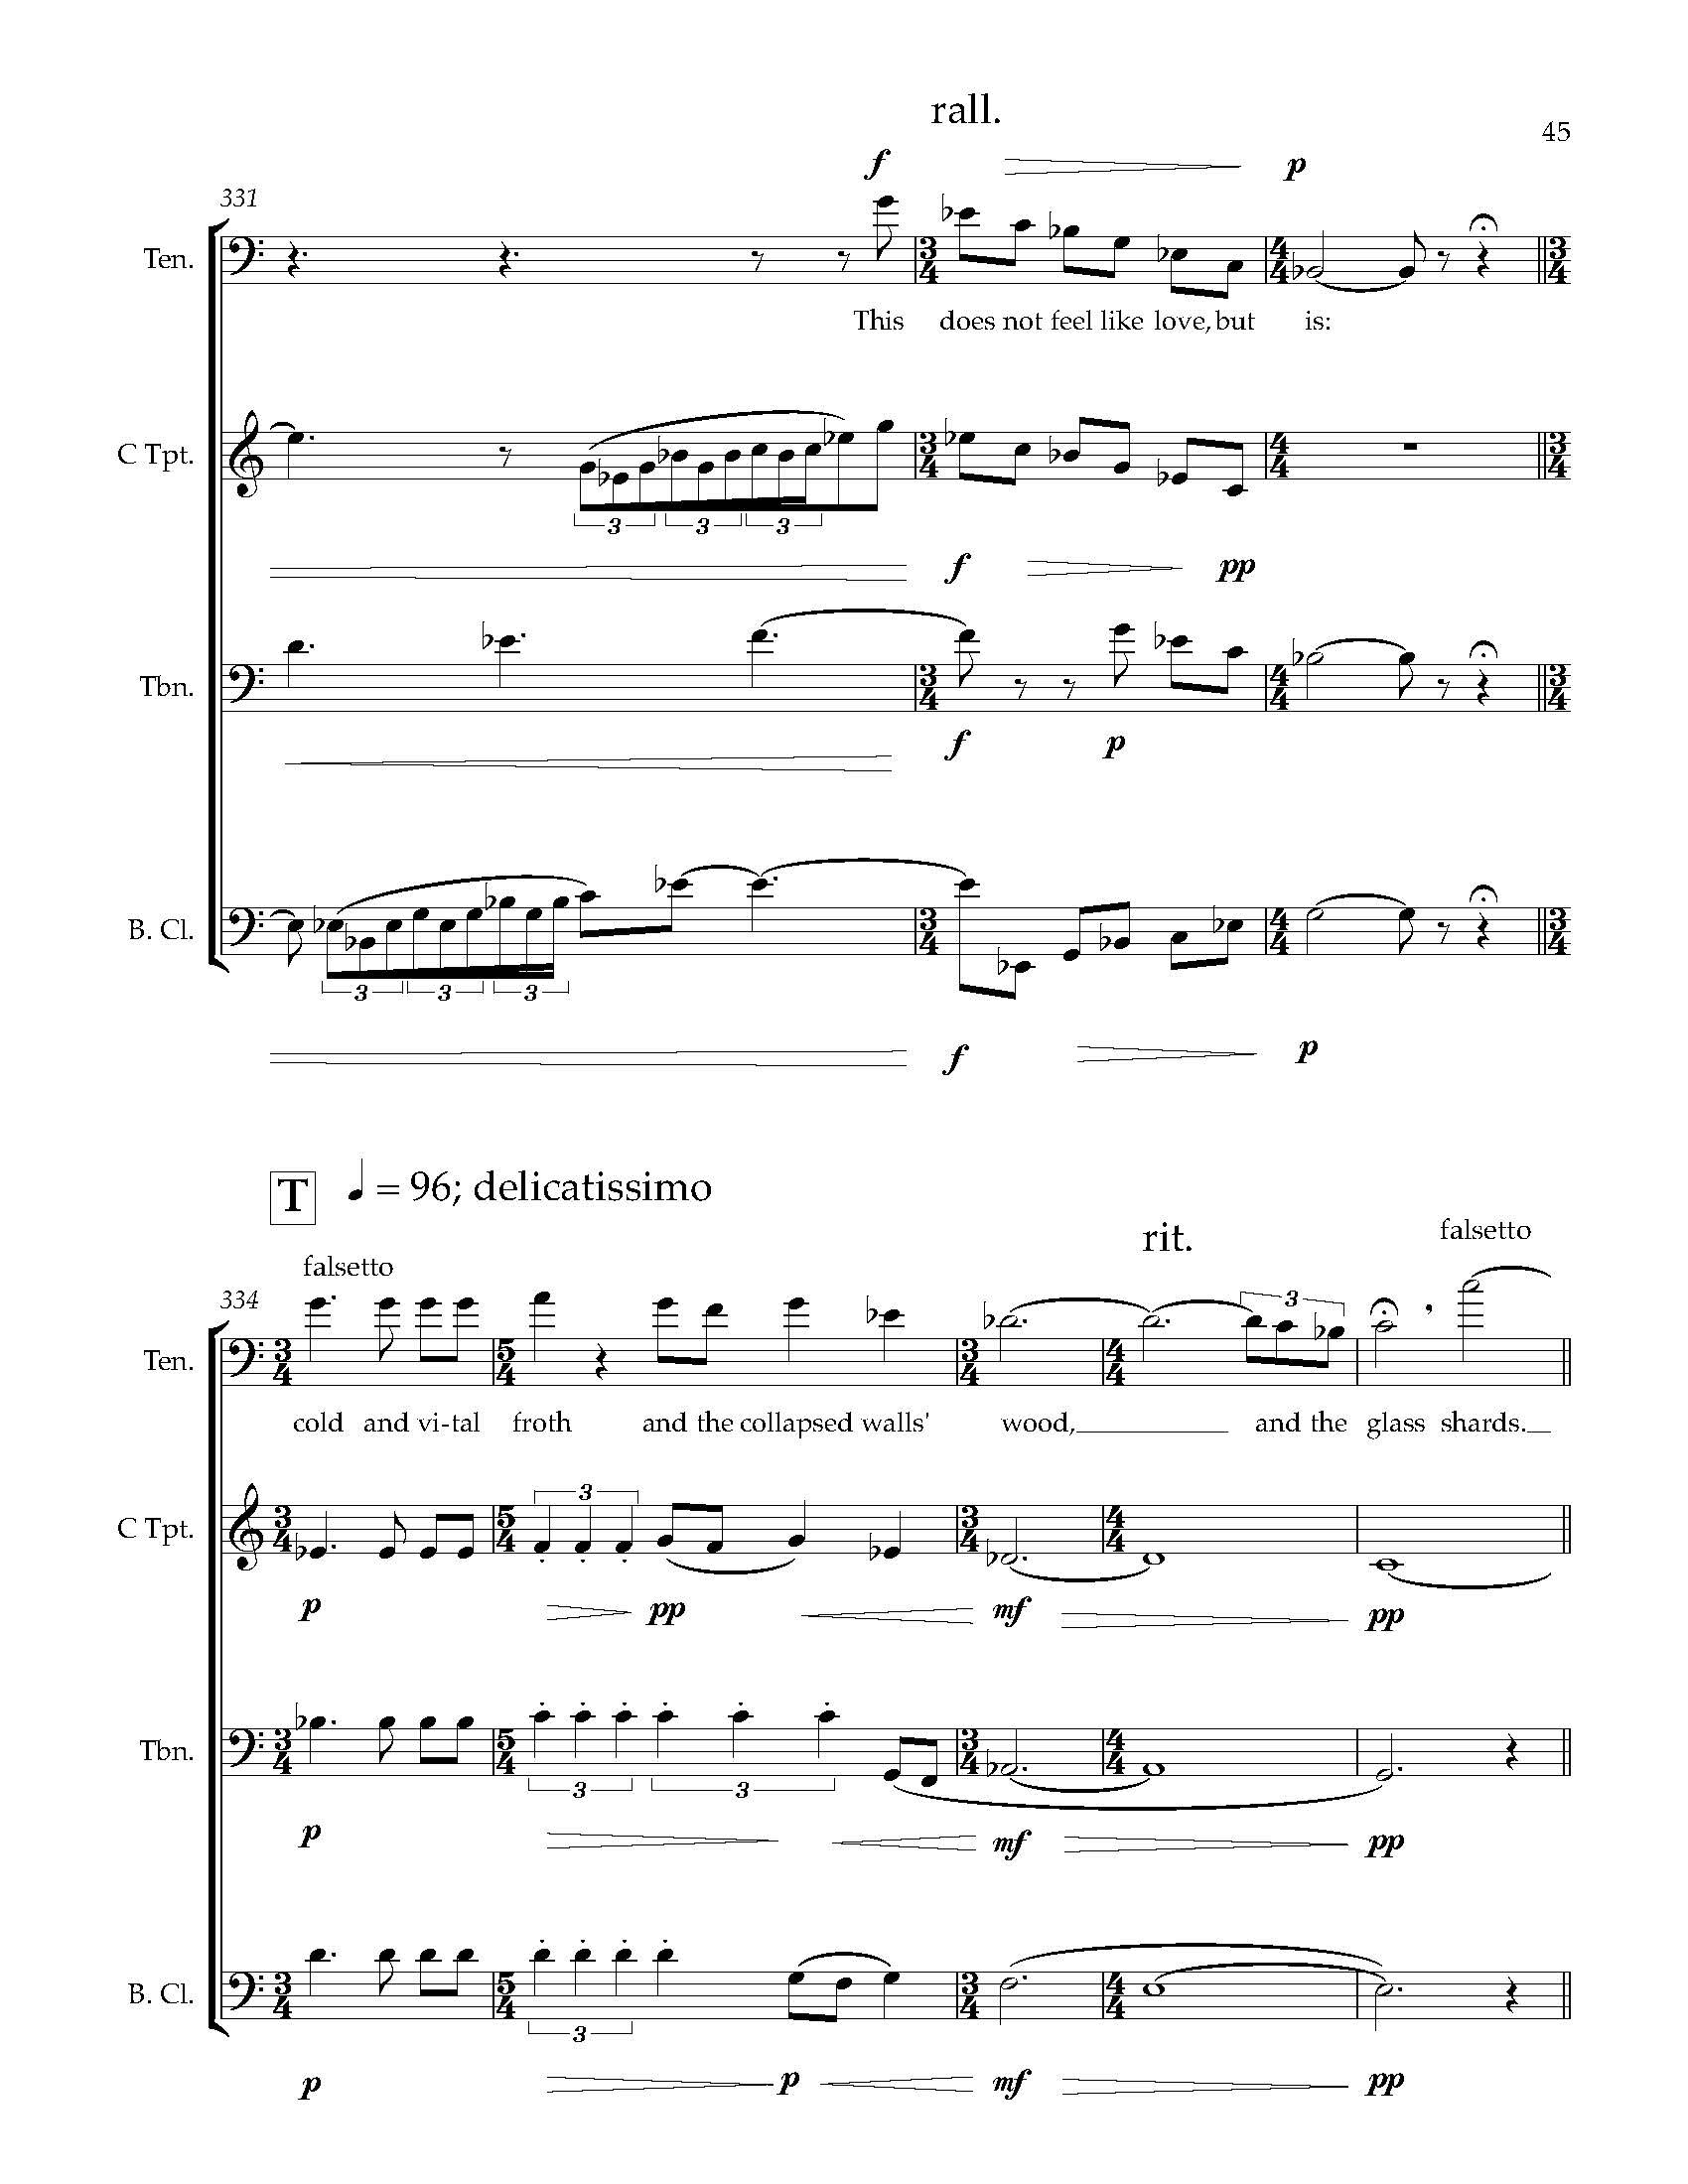 Many Worlds [1] - Complete Score_Page_54.jpg